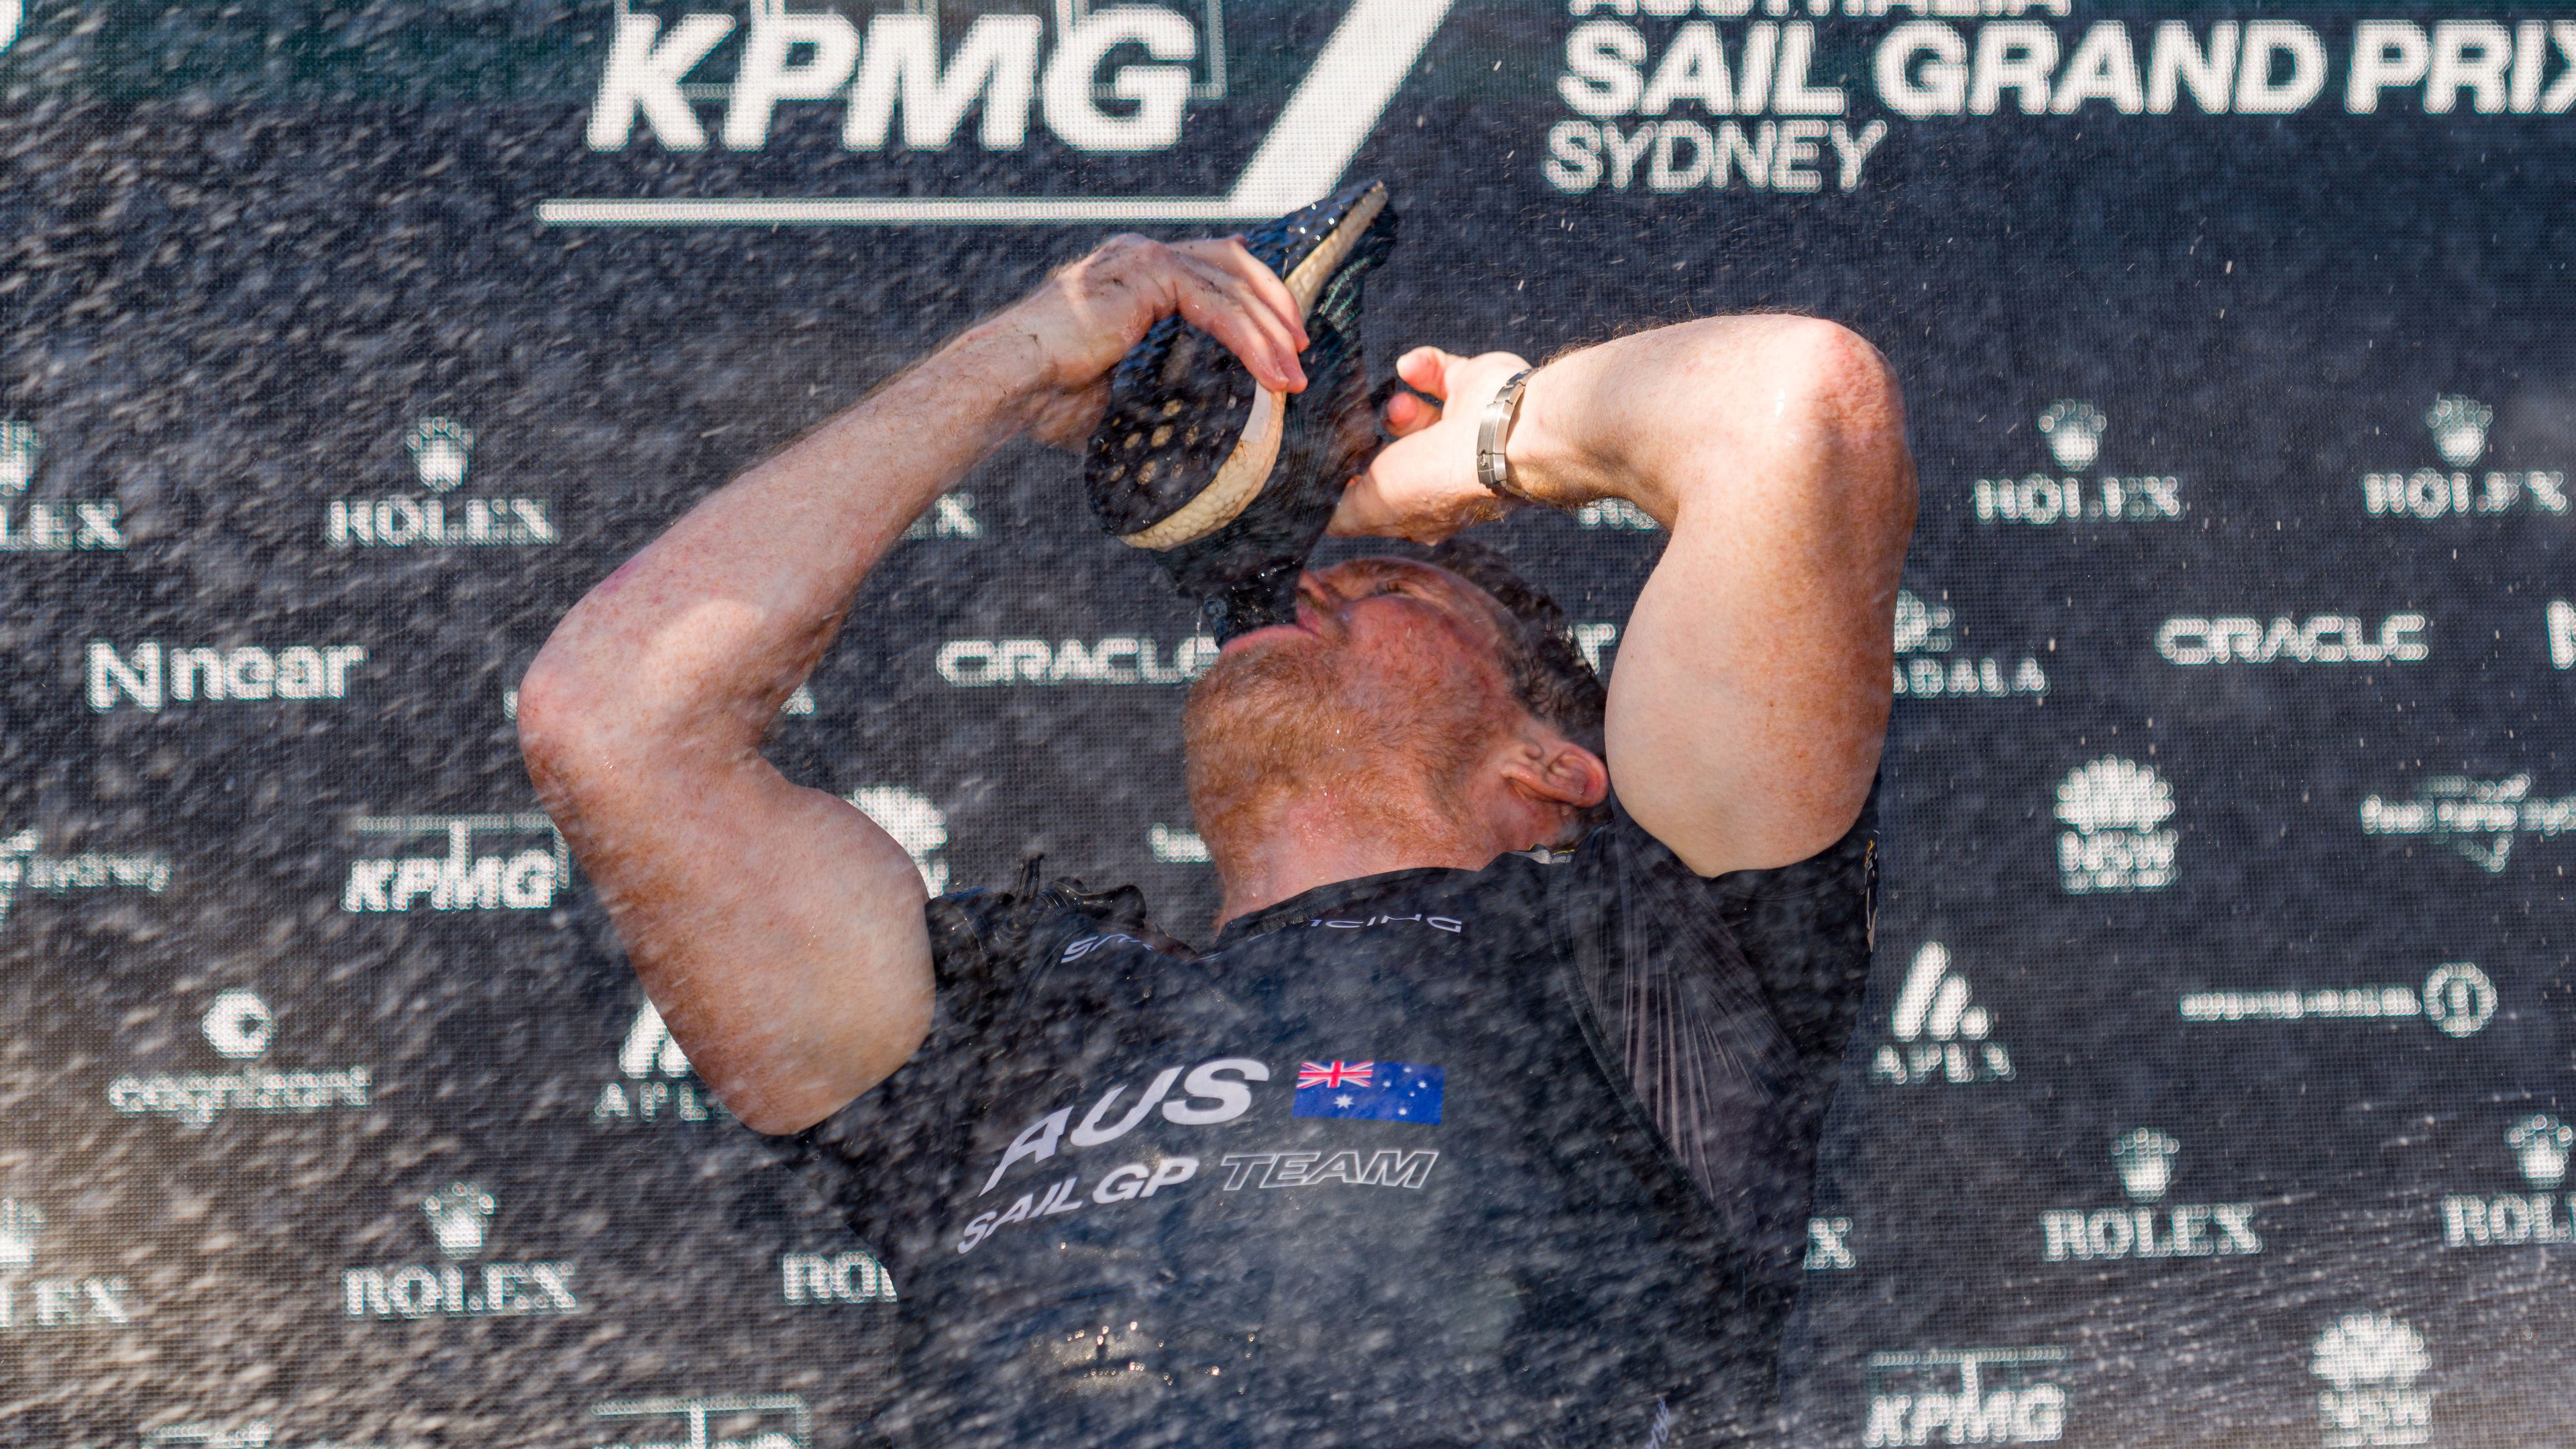 Crowd treated to a shoey as Australia comes from behind to secure incredible SailGP victory